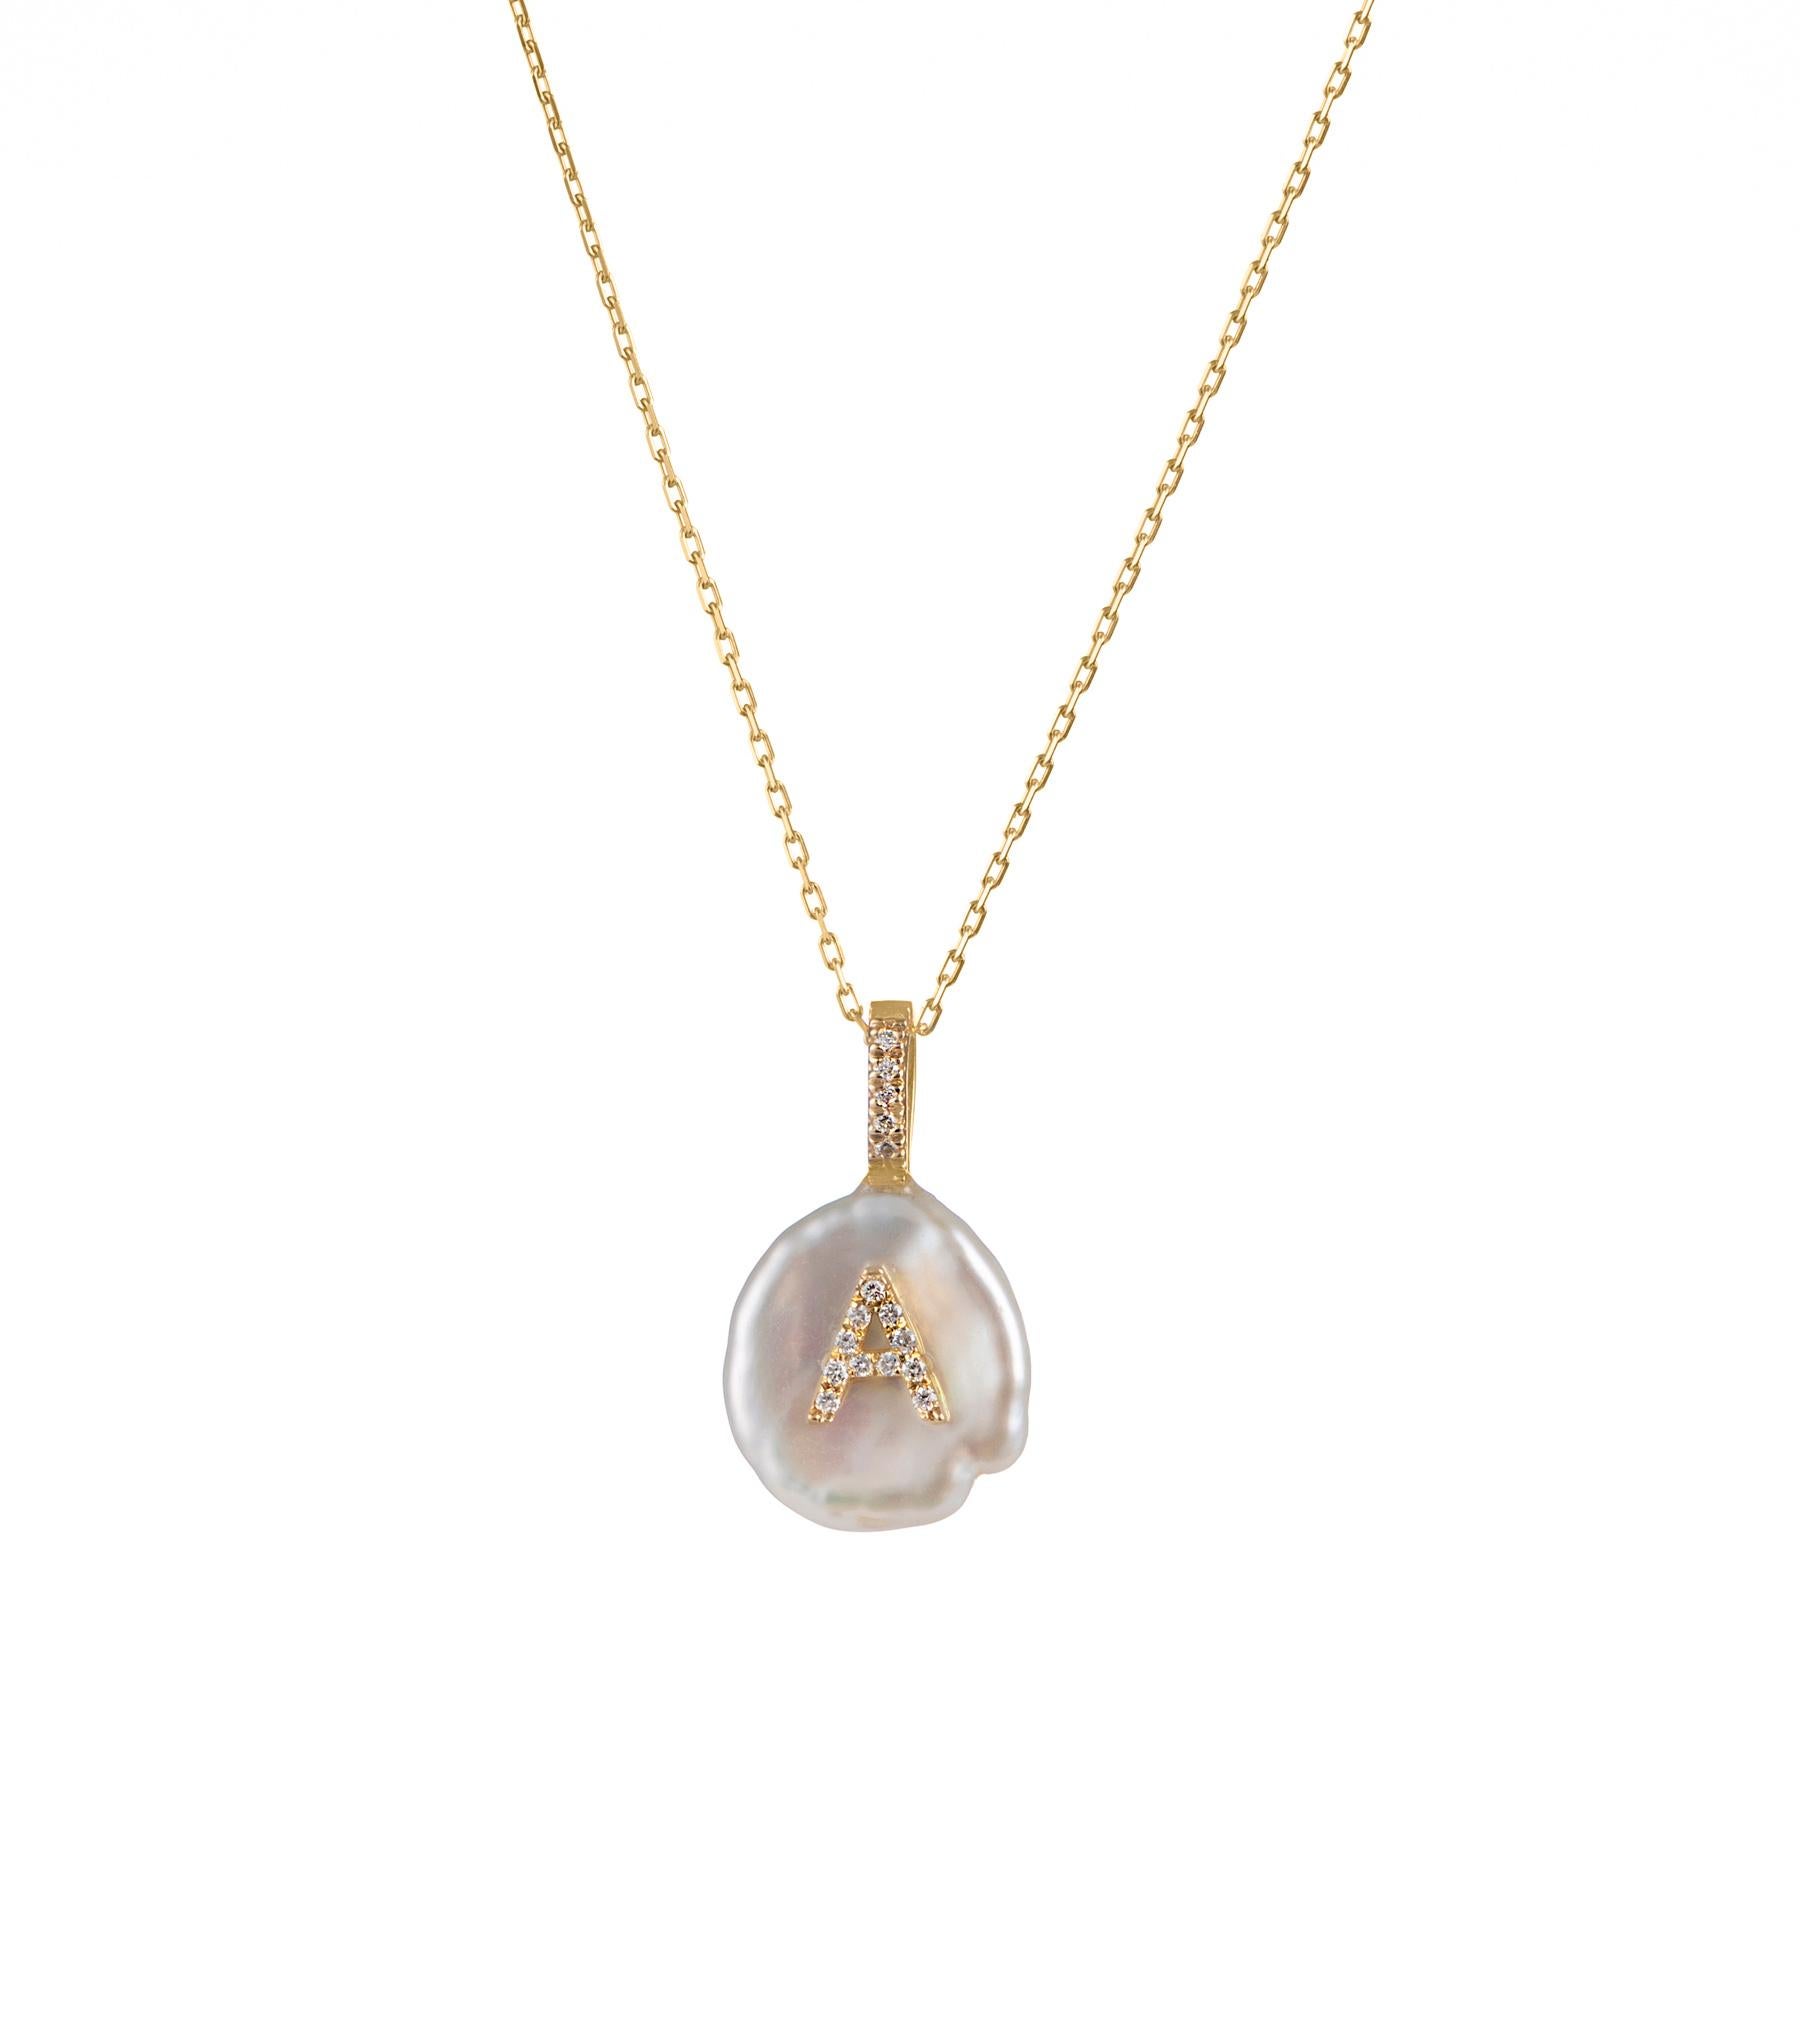 Honor the love you have for yourself or a special someone with our Diamond Initial Petal Necklace. The initial is casted from 18Karat Yellow Gold and set with natural glimmering diamonds on a freshwater petal shaped pearl.
Each petal pearl is